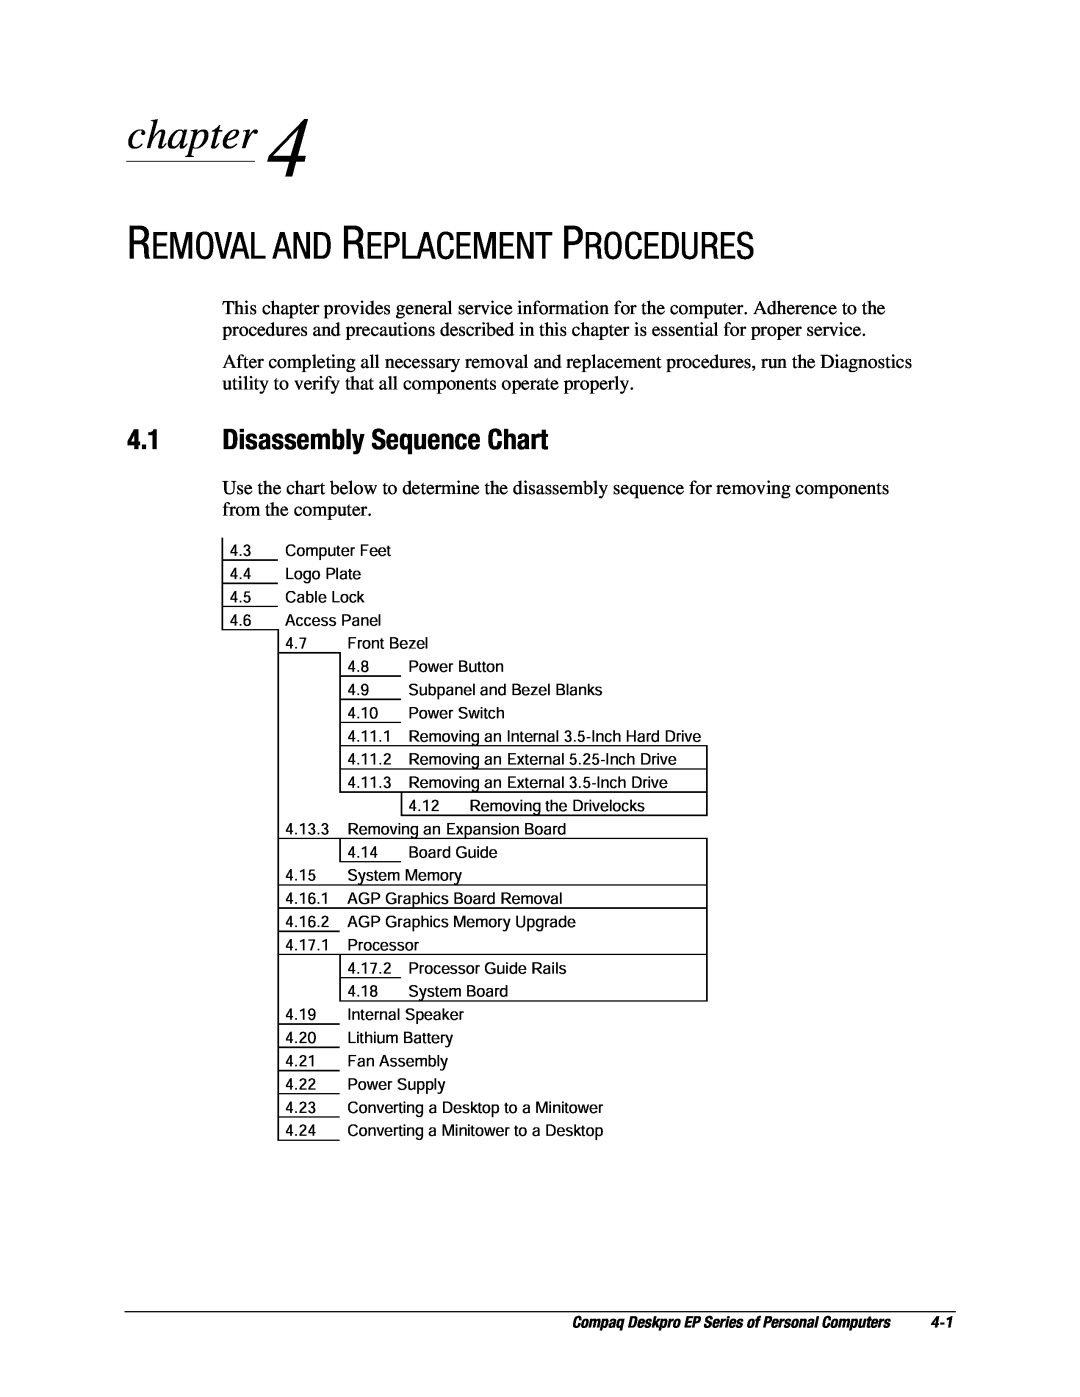 Compaq EP Series manual Removal And Replacement Procedures, Disassembly Sequence Chart, chapter 